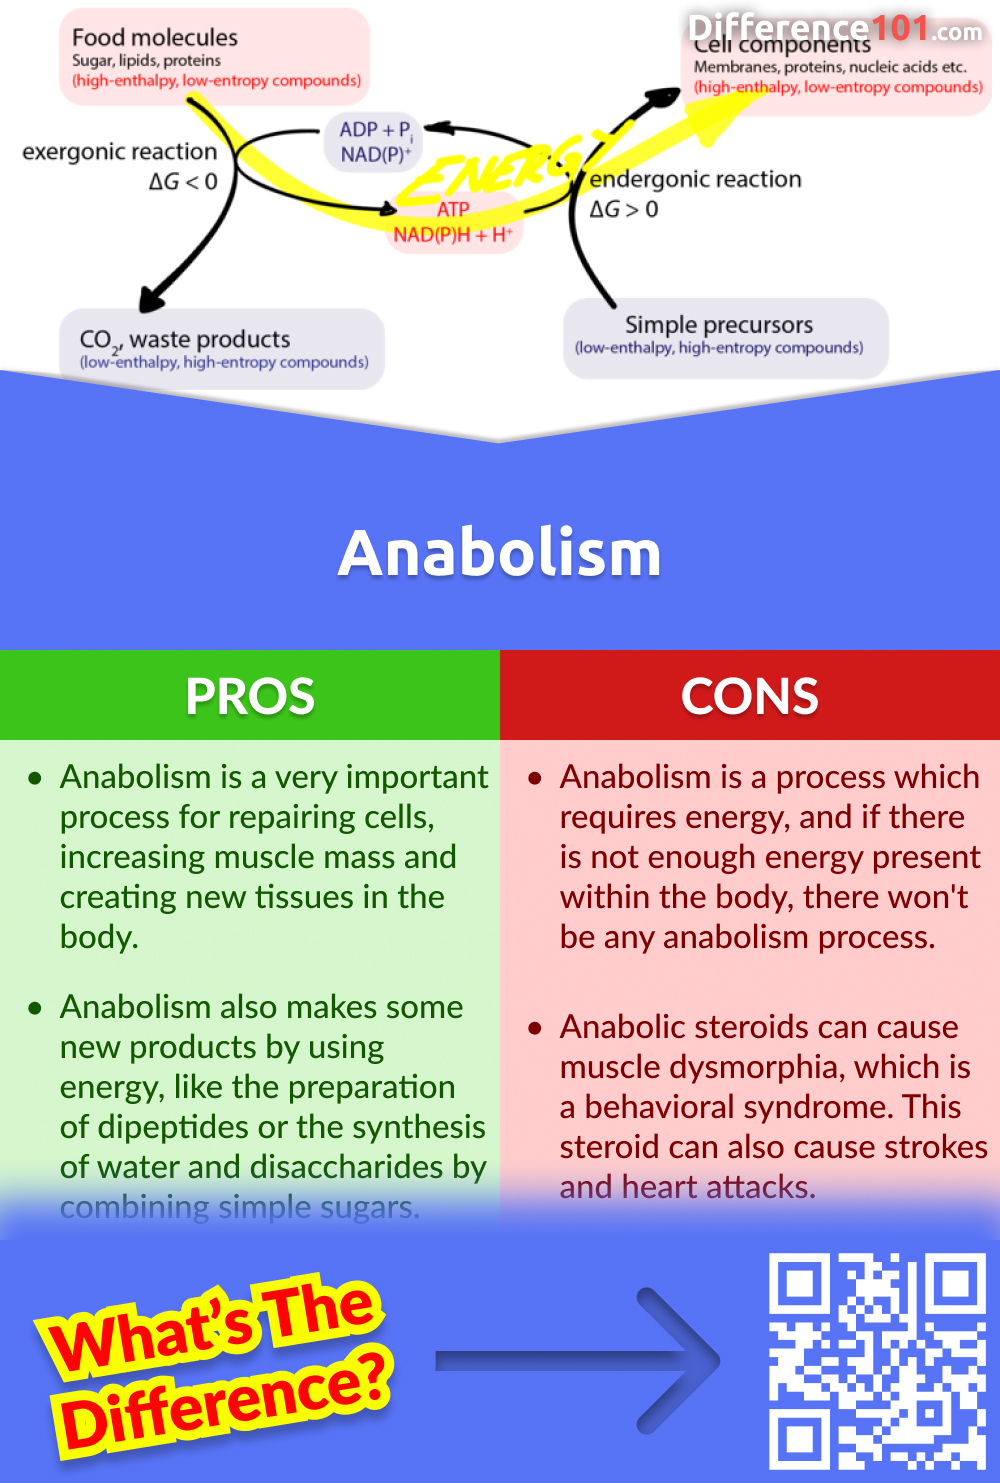 Anabolism Pros and Cons
